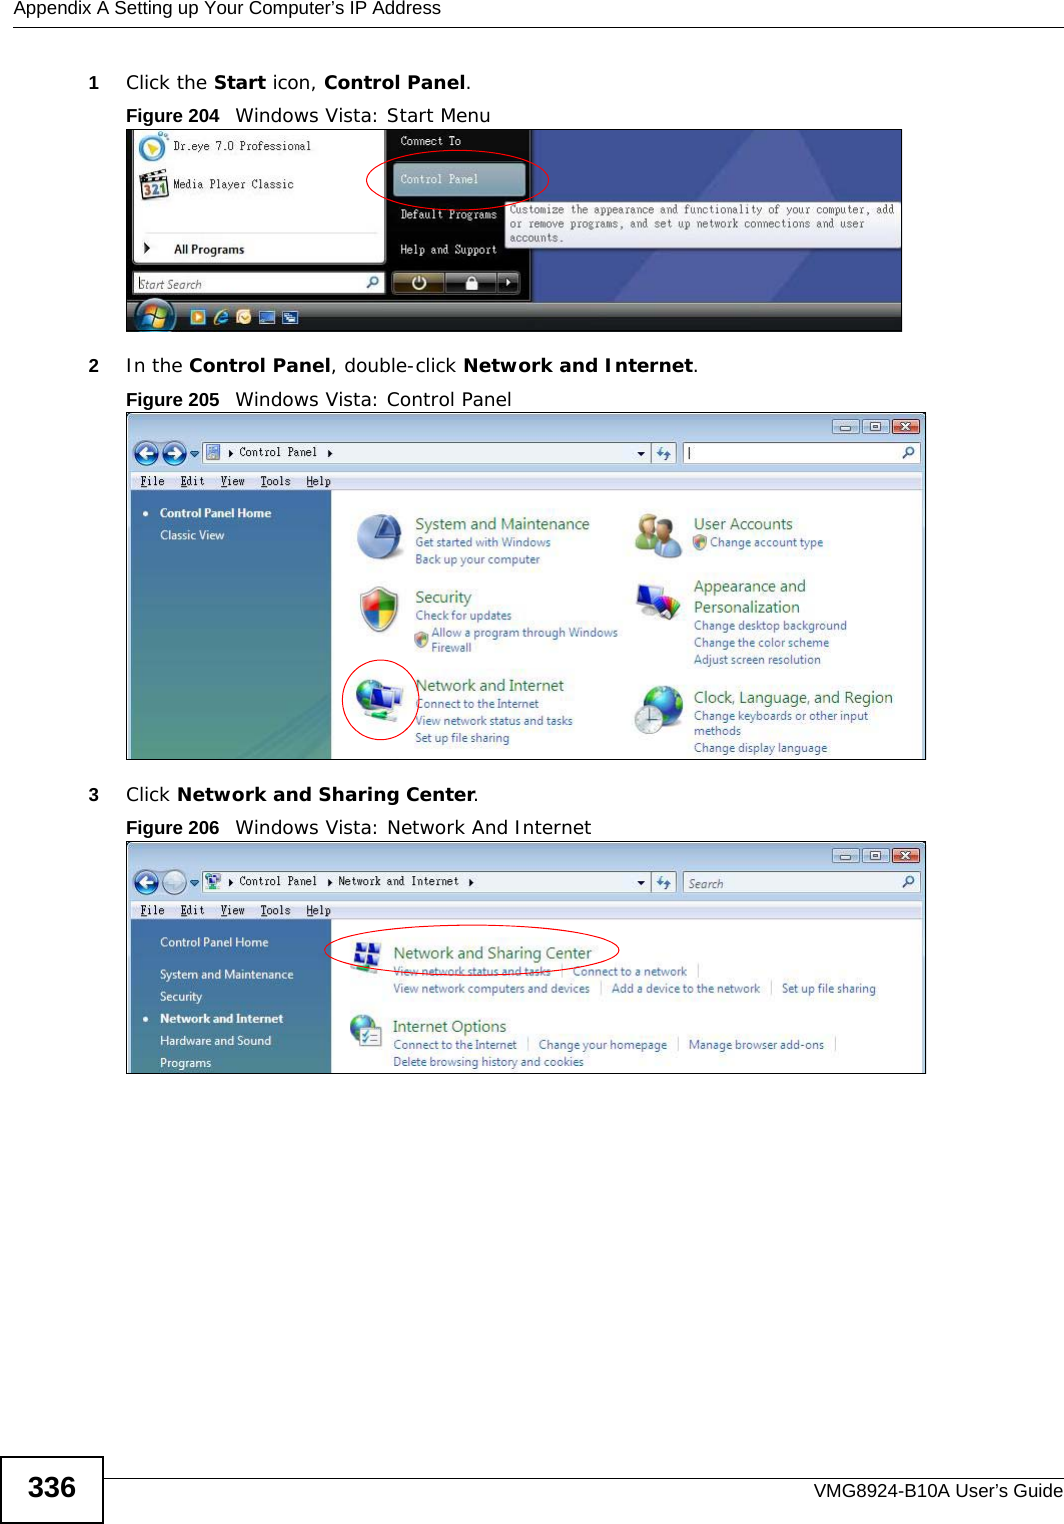 Appendix A Setting up Your Computer’s IP AddressVMG8924-B10A User’s Guide3361Click the Start icon, Control Panel.Figure 204   Windows Vista: Start Menu2In the Control Panel, double-click Network and Internet.Figure 205   Windows Vista: Control Panel3Click Network and Sharing Center.Figure 206   Windows Vista: Network And Internet